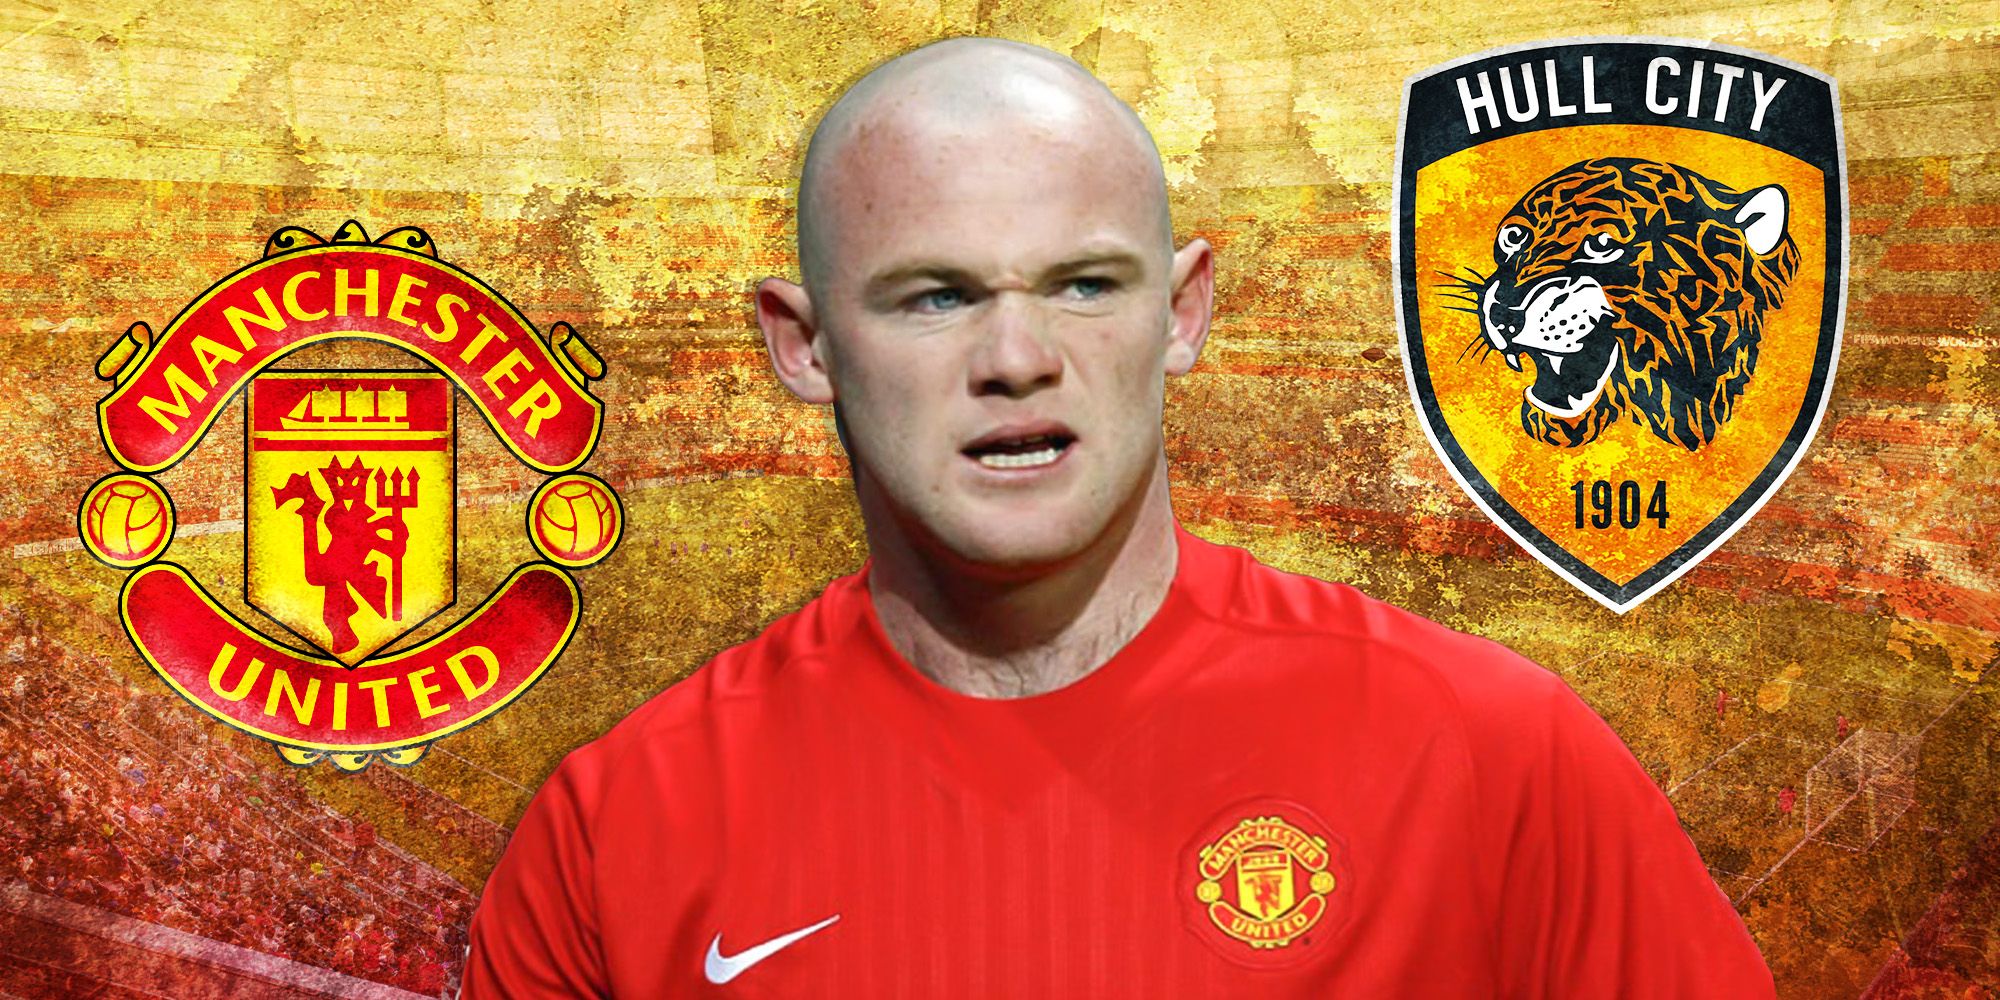 Wayne Rooney's Crazy Drop-Ball in Man United v Hull in 2008 Remembered